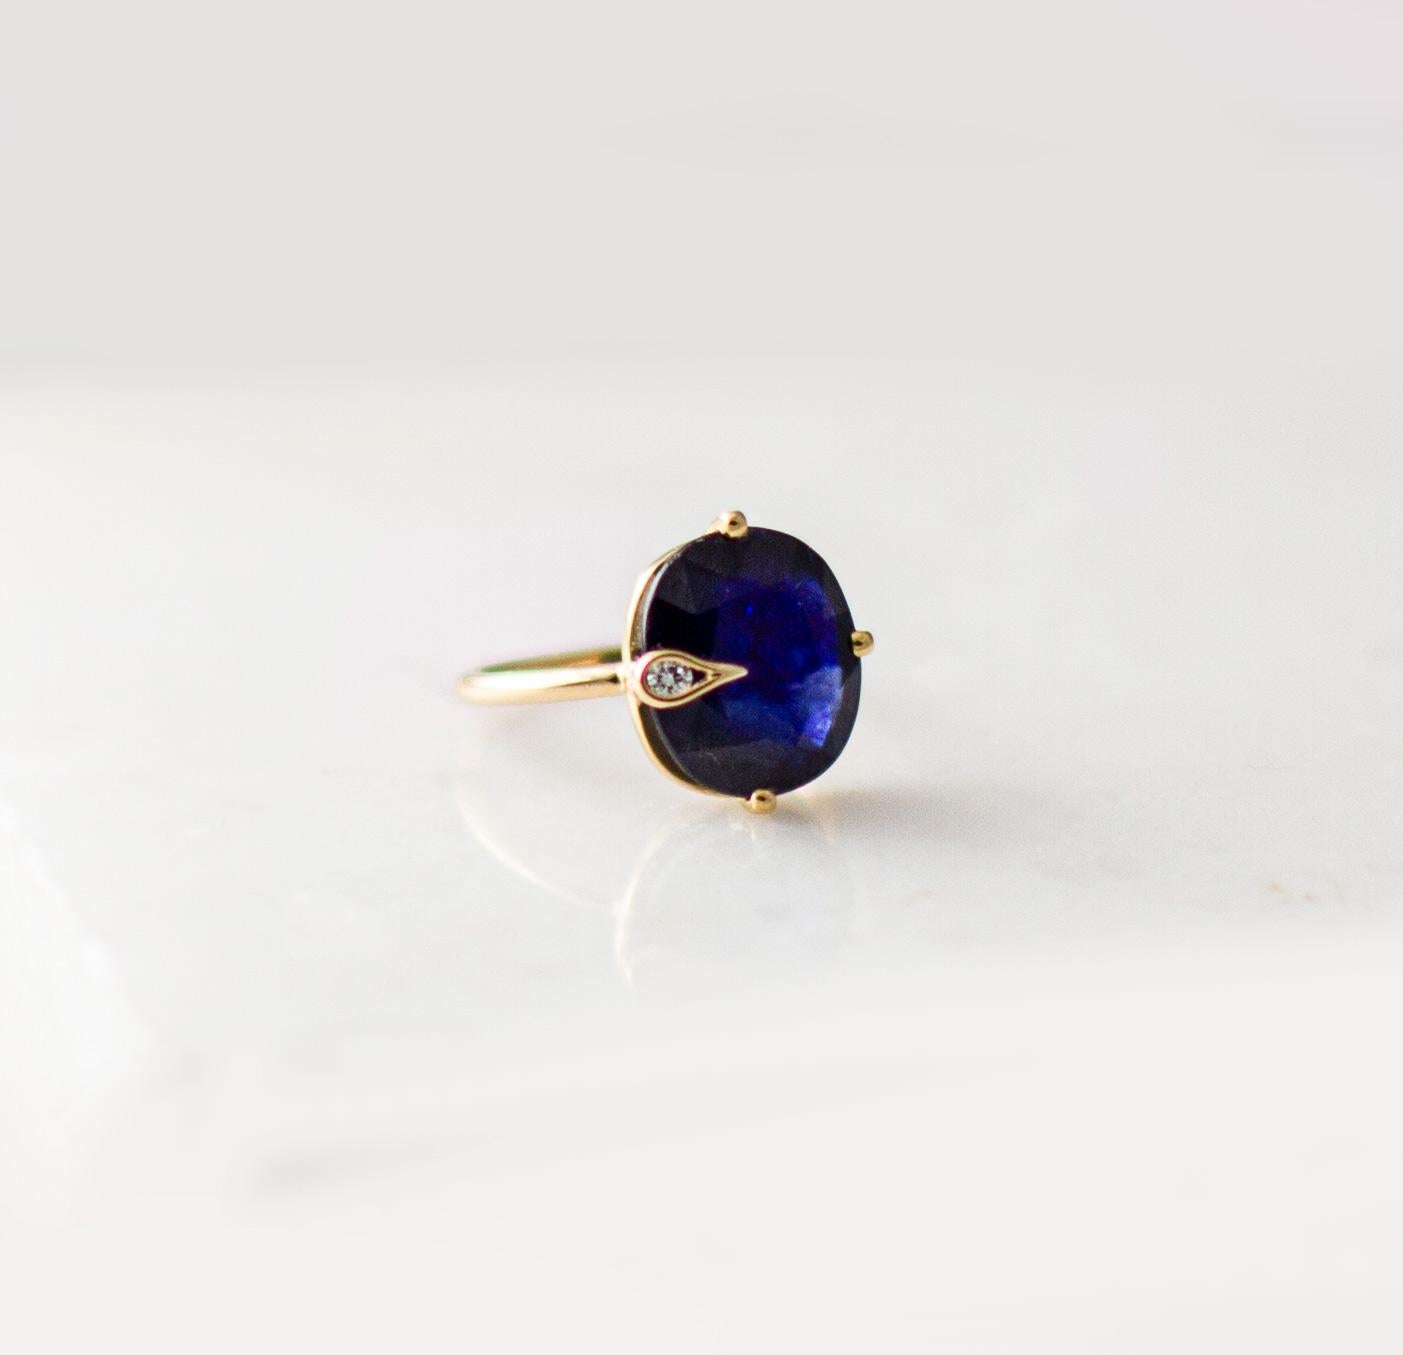 This contemporary Peacock ring is in 18 karat yellow or rose gold with natural oval cut blue sapphire. The ring is easy to wear, and the gem catches eye's attention. The small round gem can be exchanged for ruby, emerald or purple, rose, yellow or